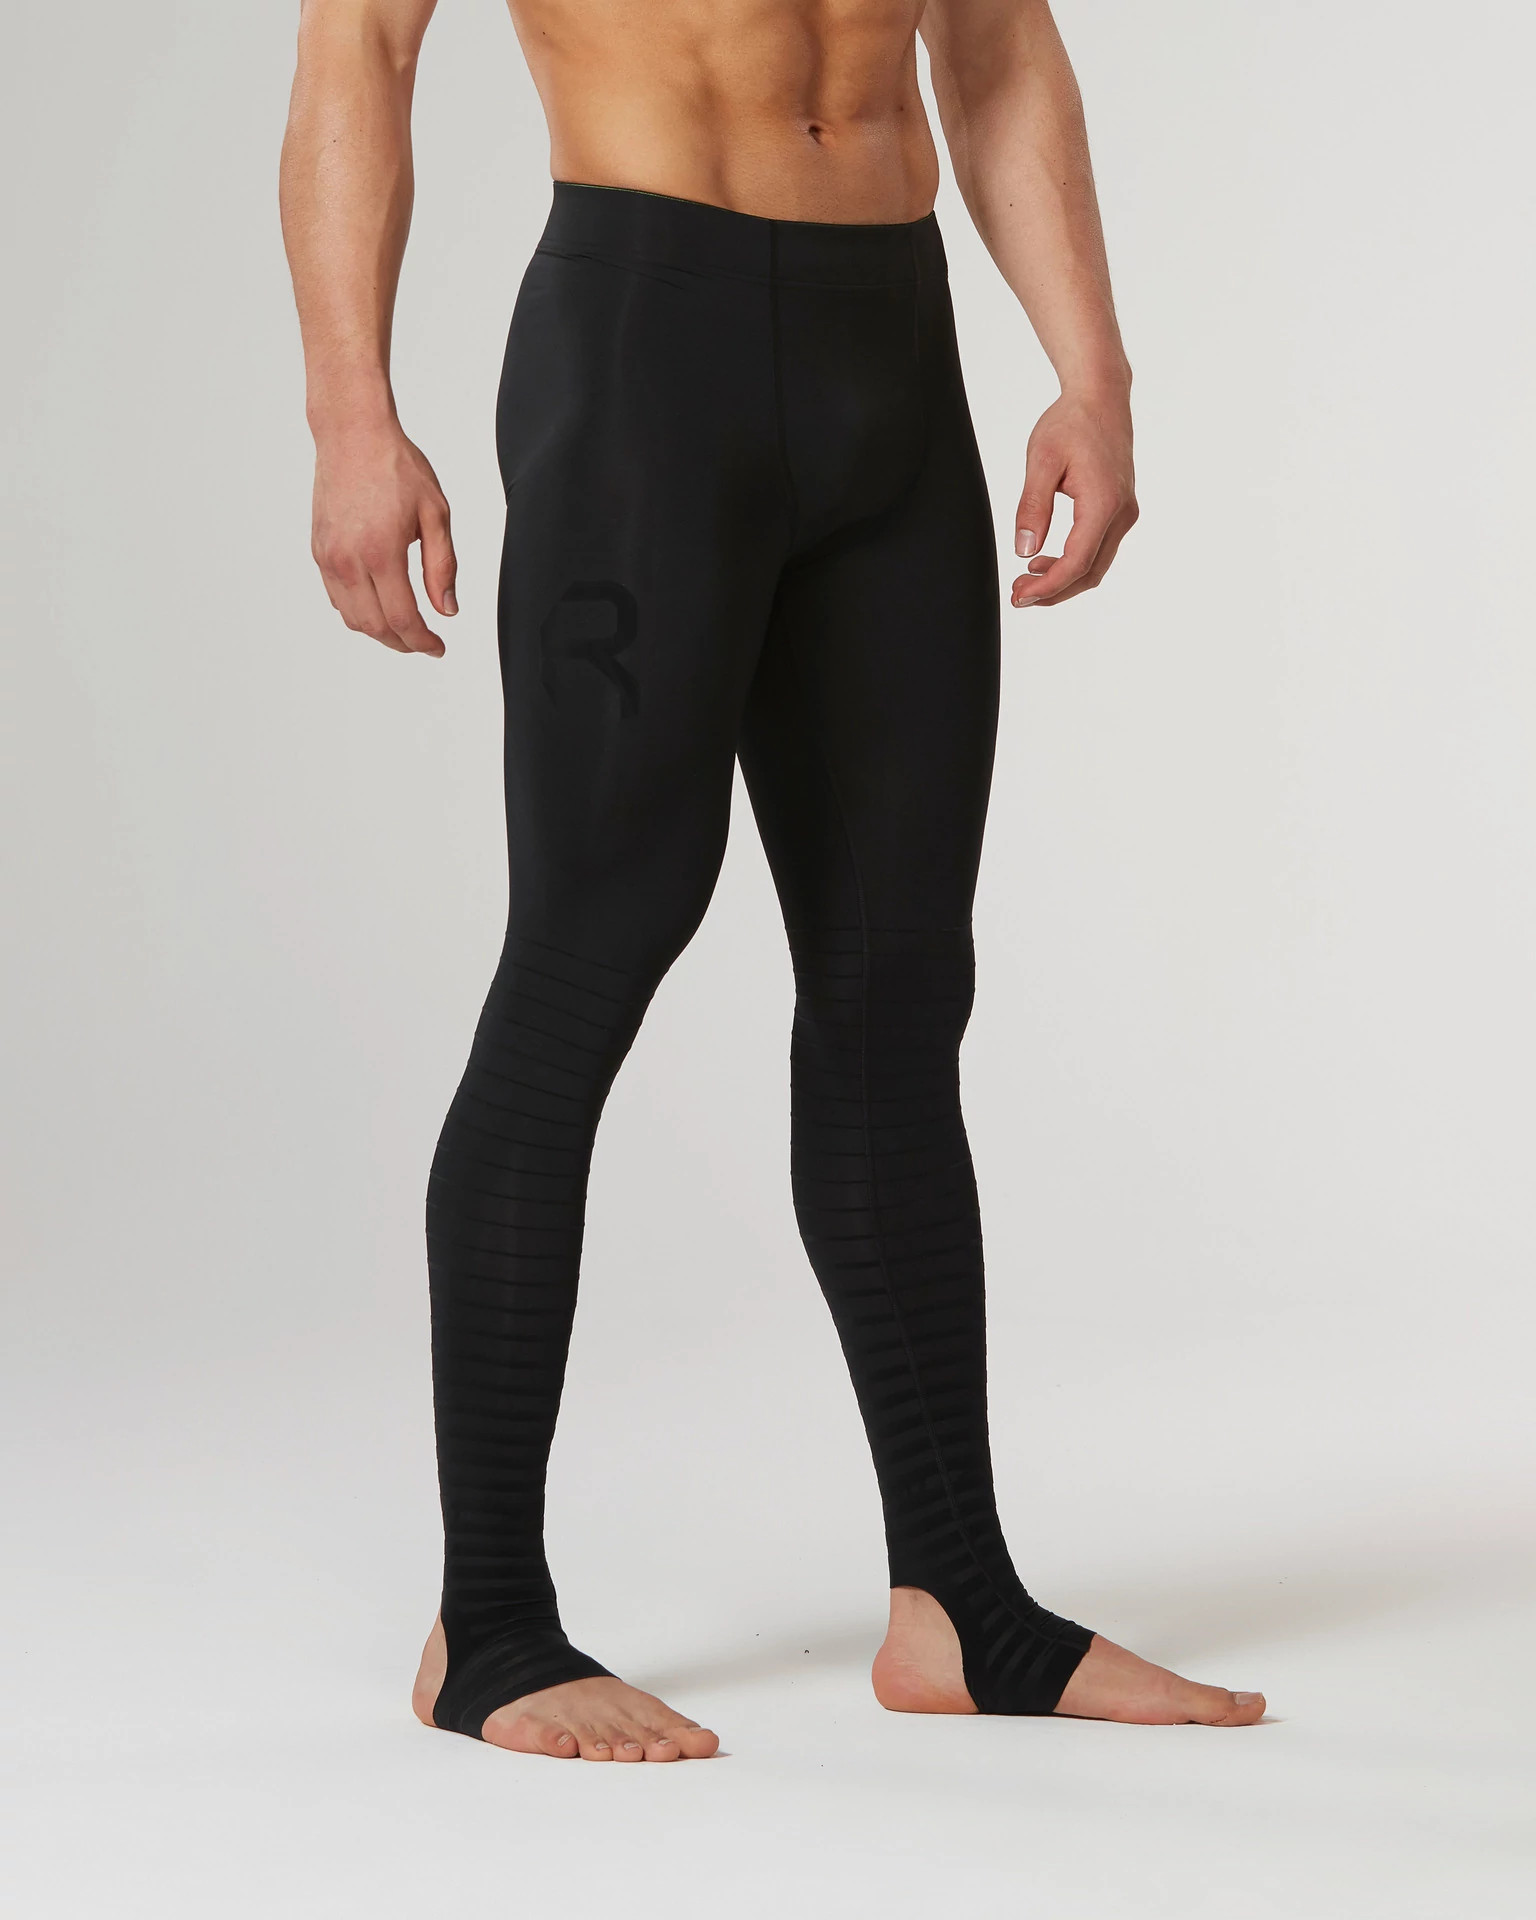 2XU Men's Refresh Recovery Compression Tights